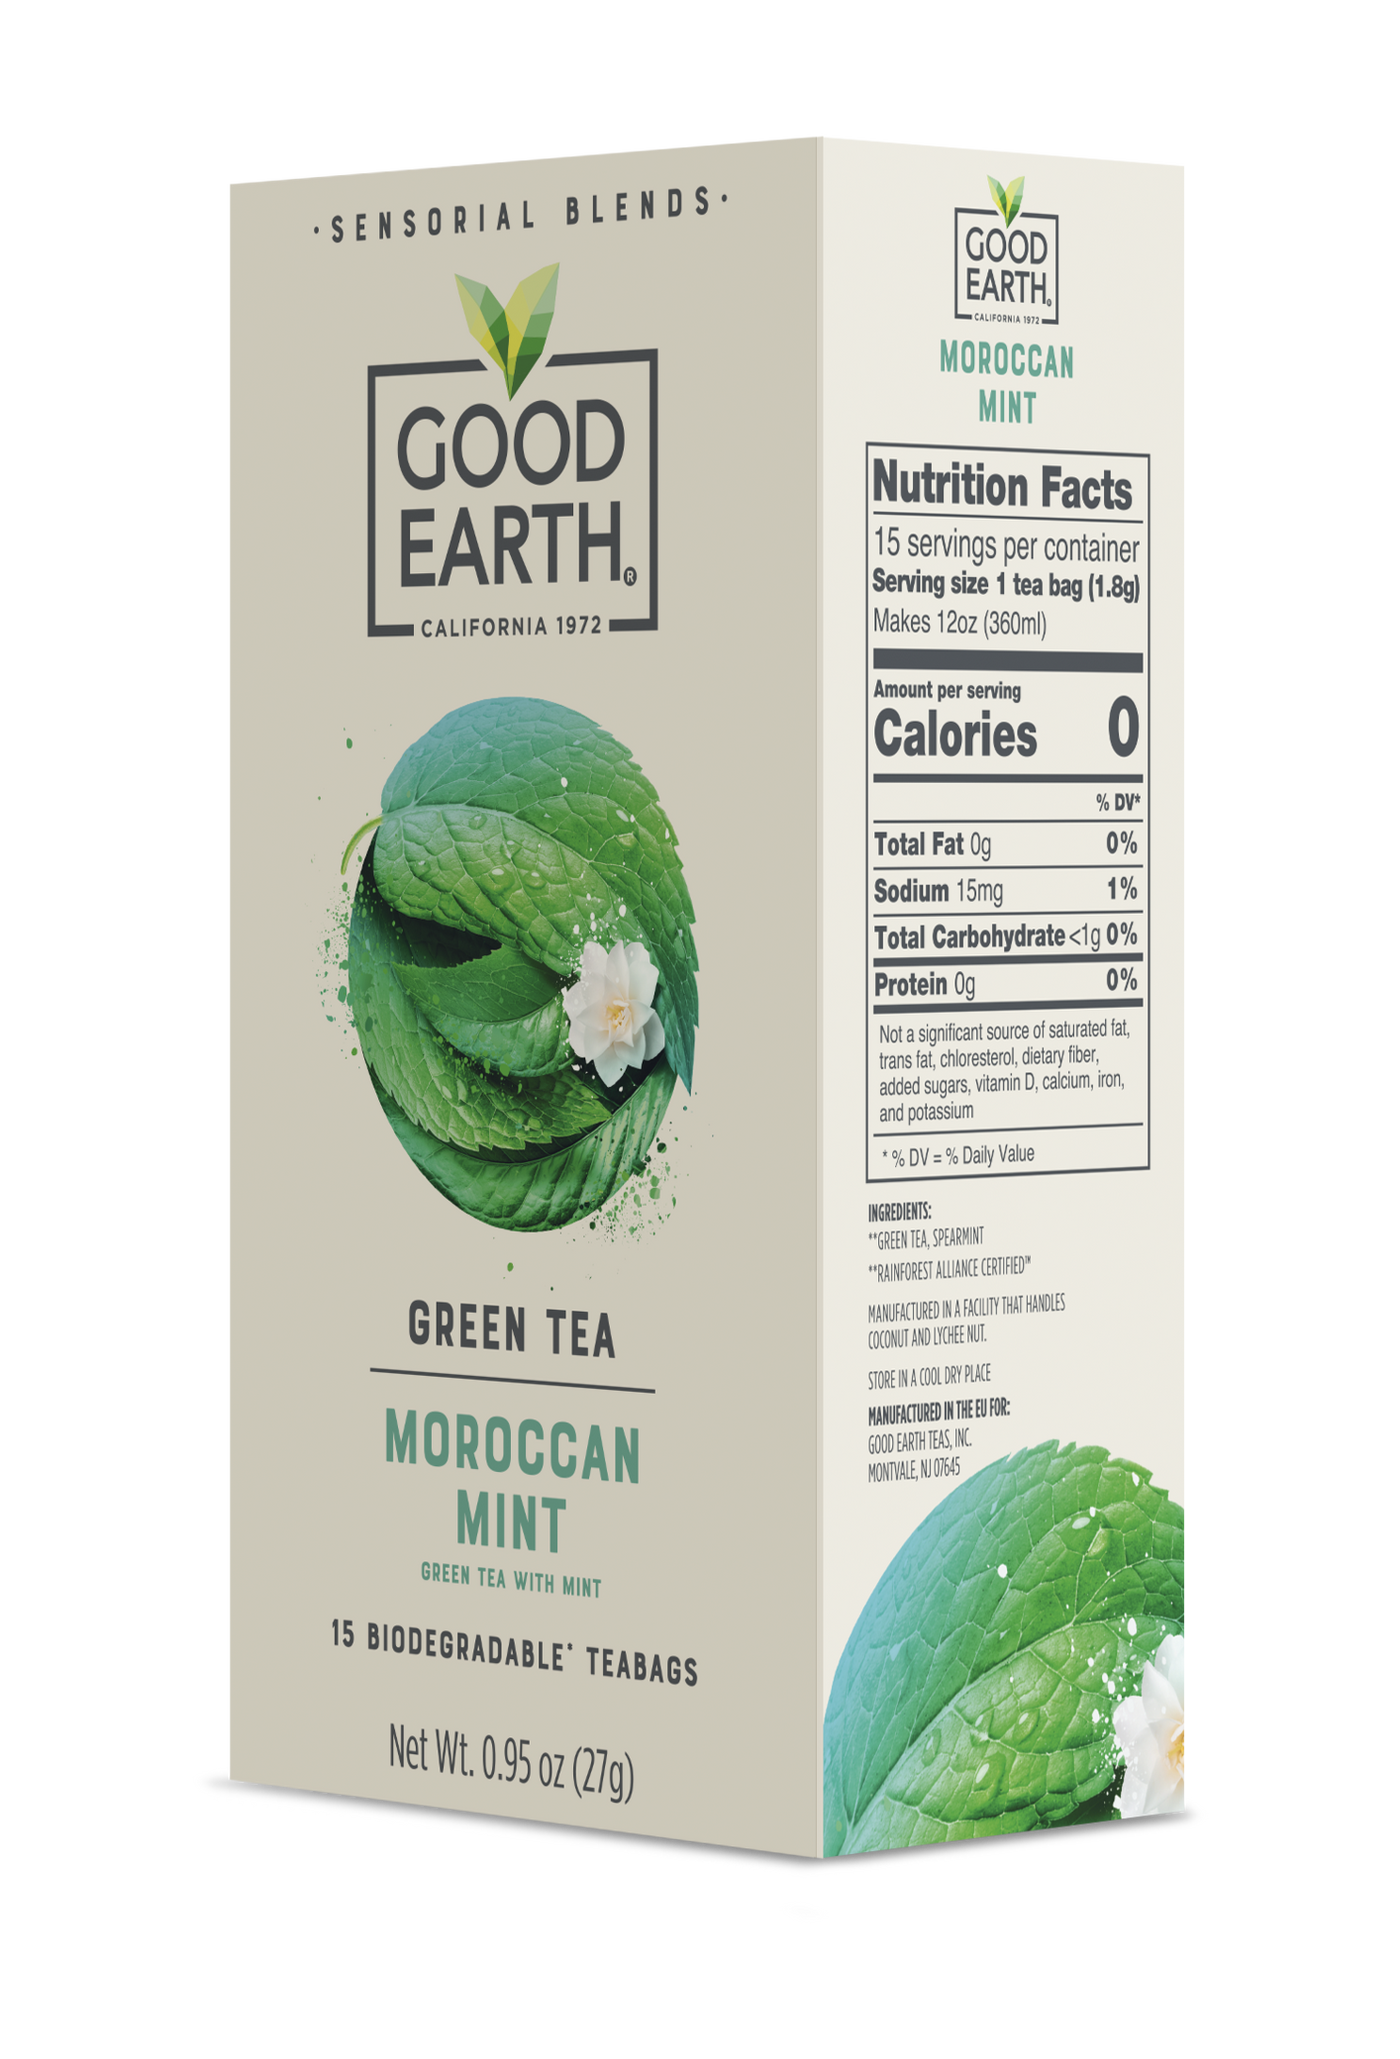 Moroccan Mint Nutrition Facts see below 